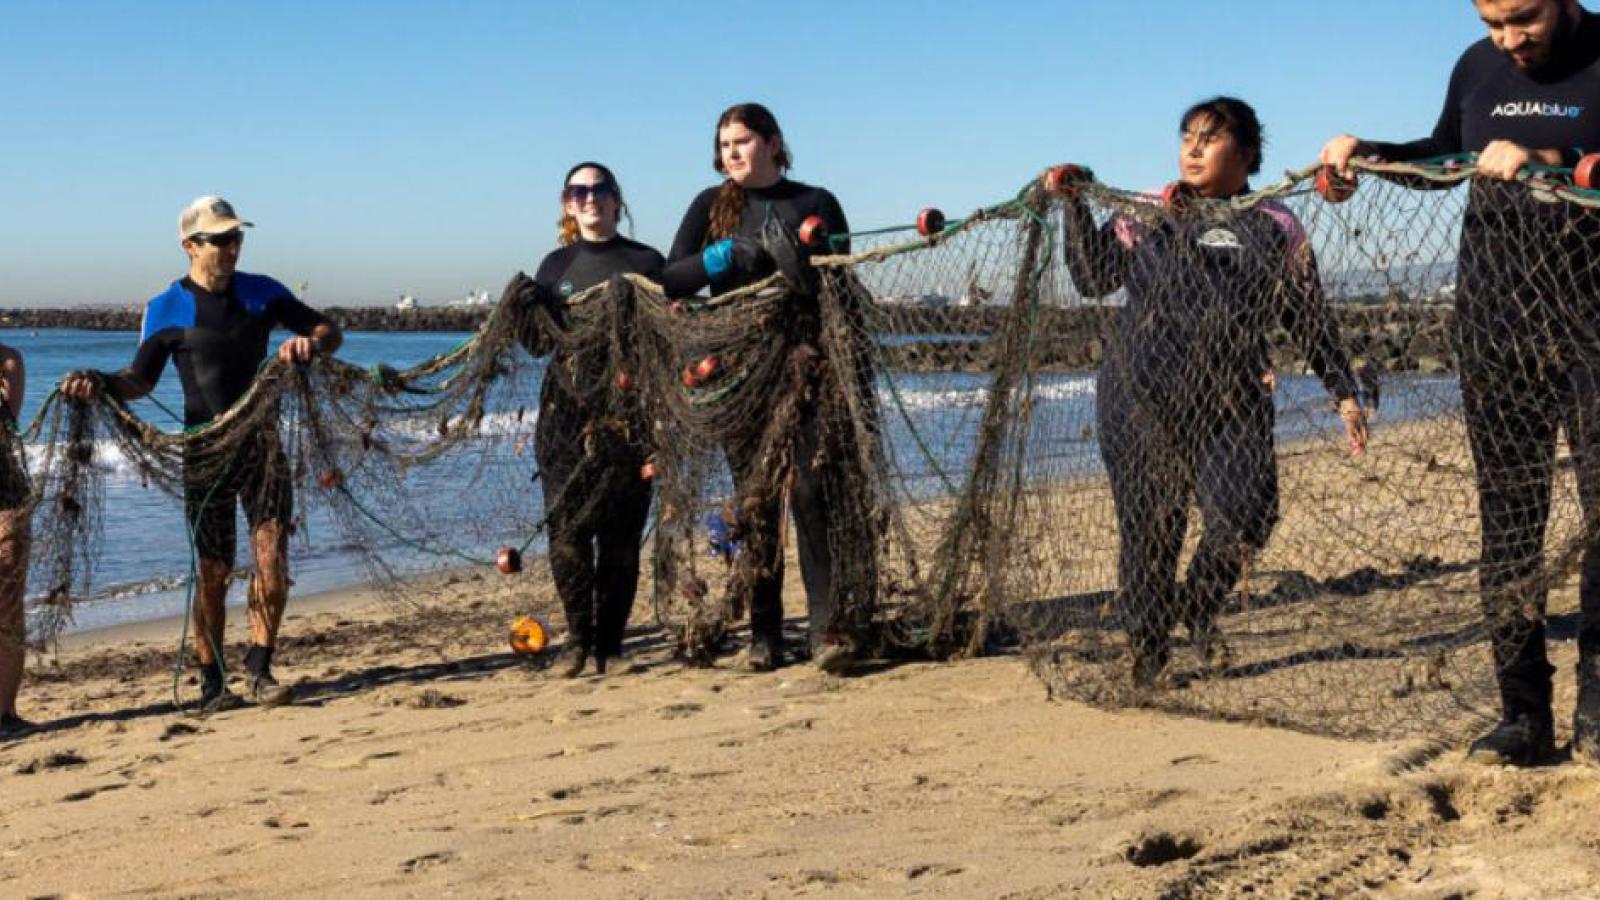 students on the beach pulling in nets